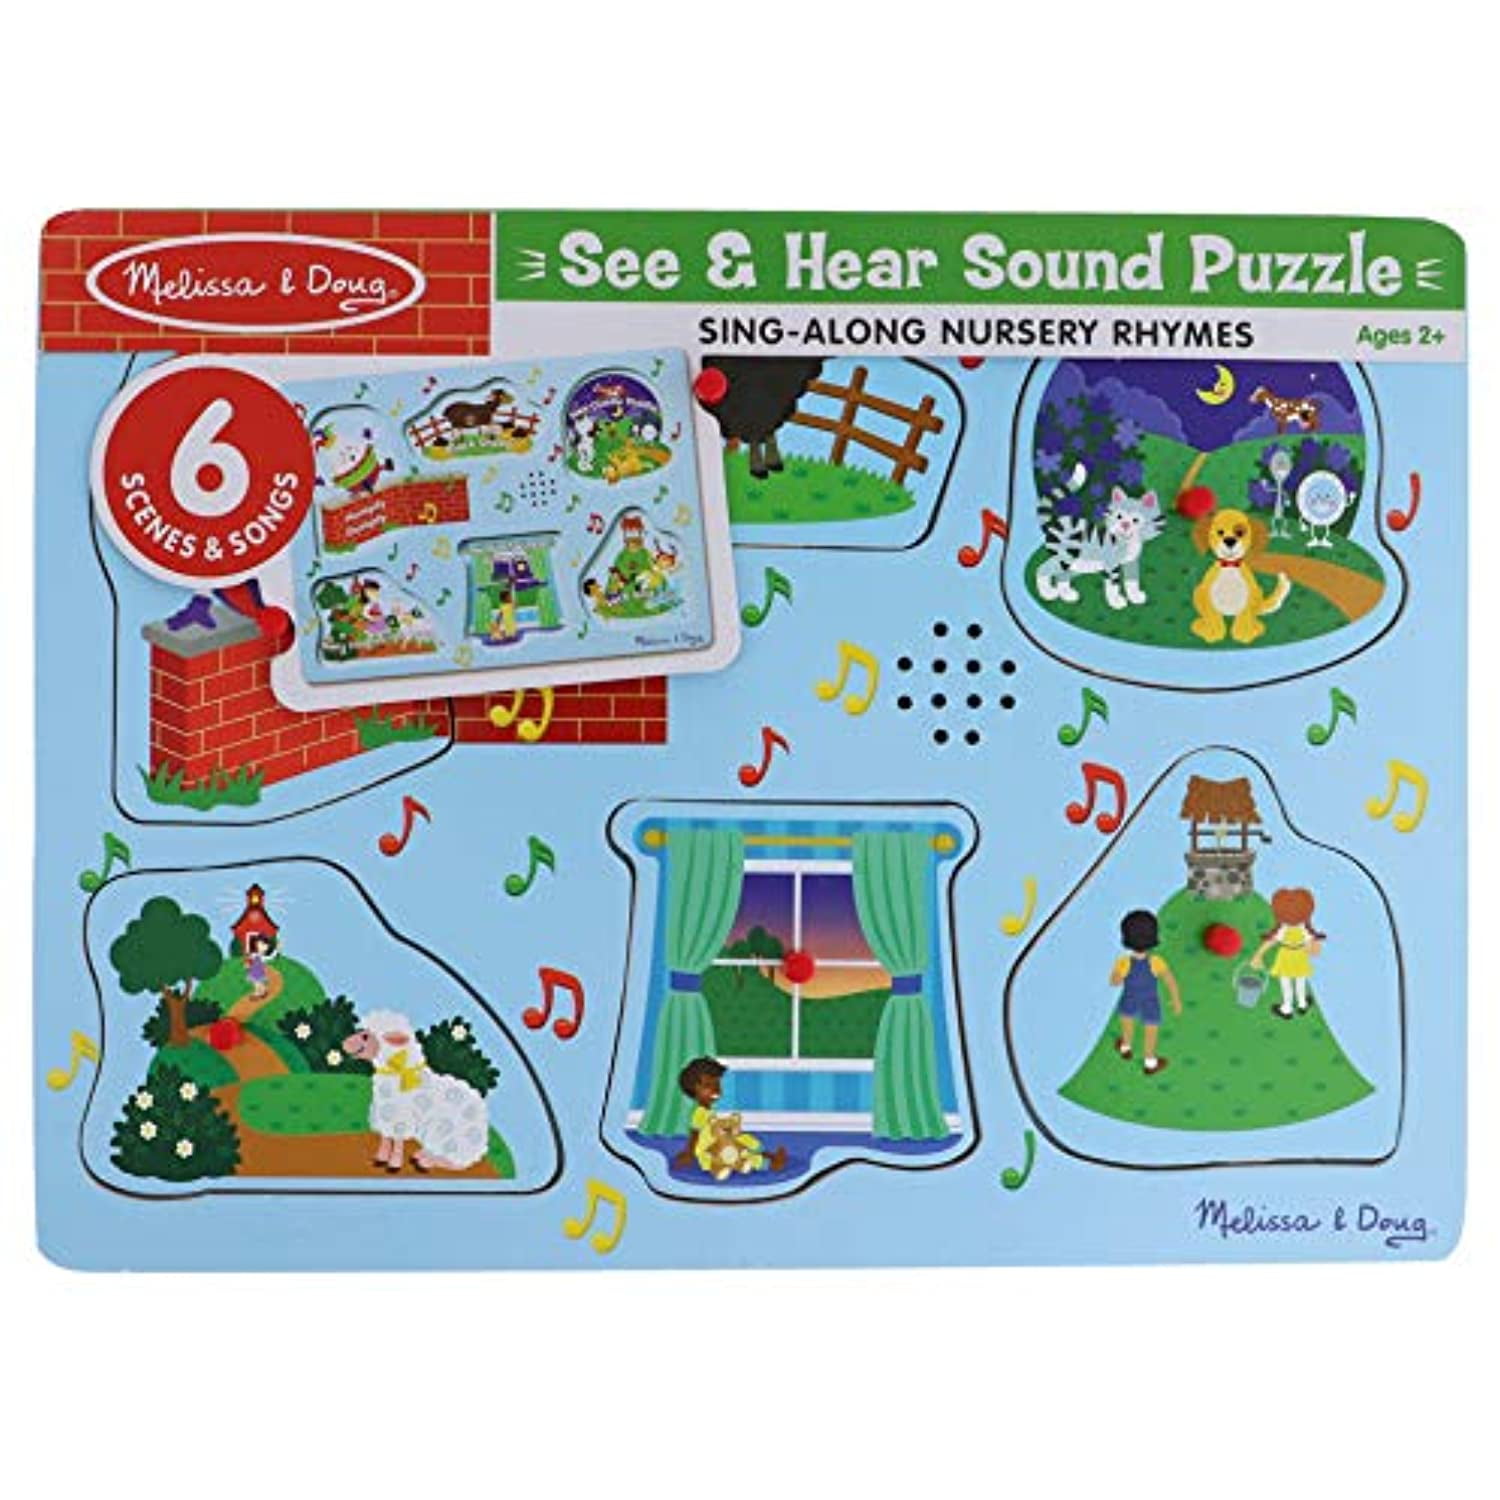 Sing-Along Nursery Rhymes 2 Song Puzzle - PLAYNOW! Toys and Games